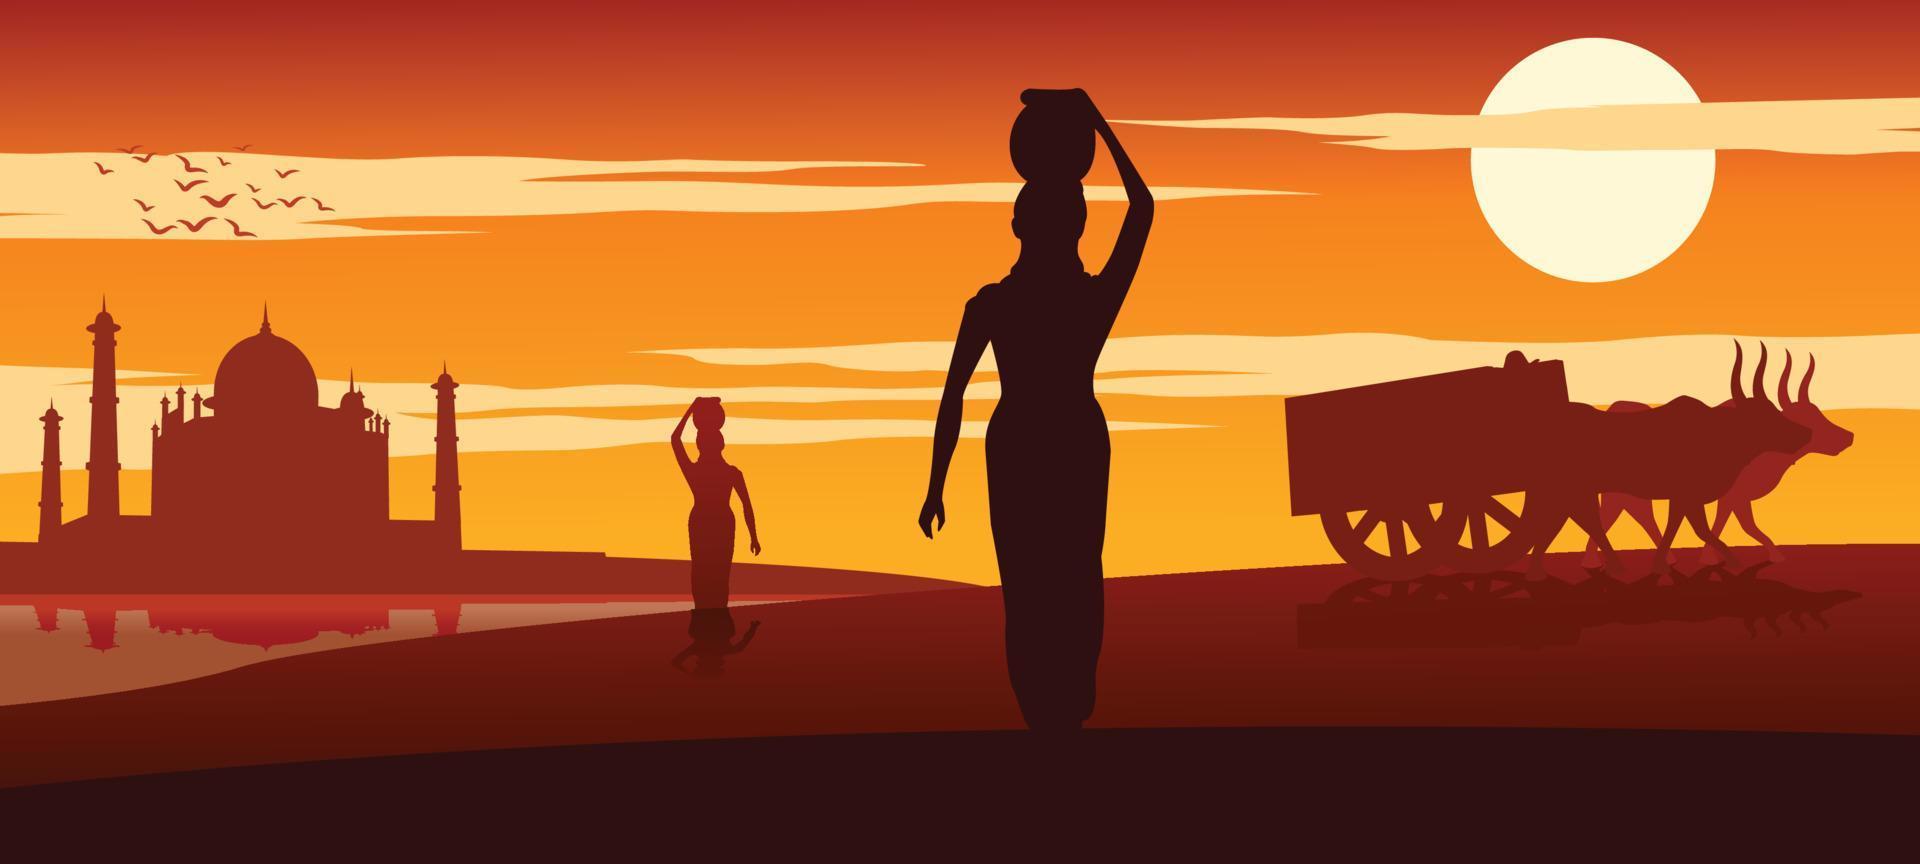 woman carry water for routine use from river while cart moves pass at sunset time vector